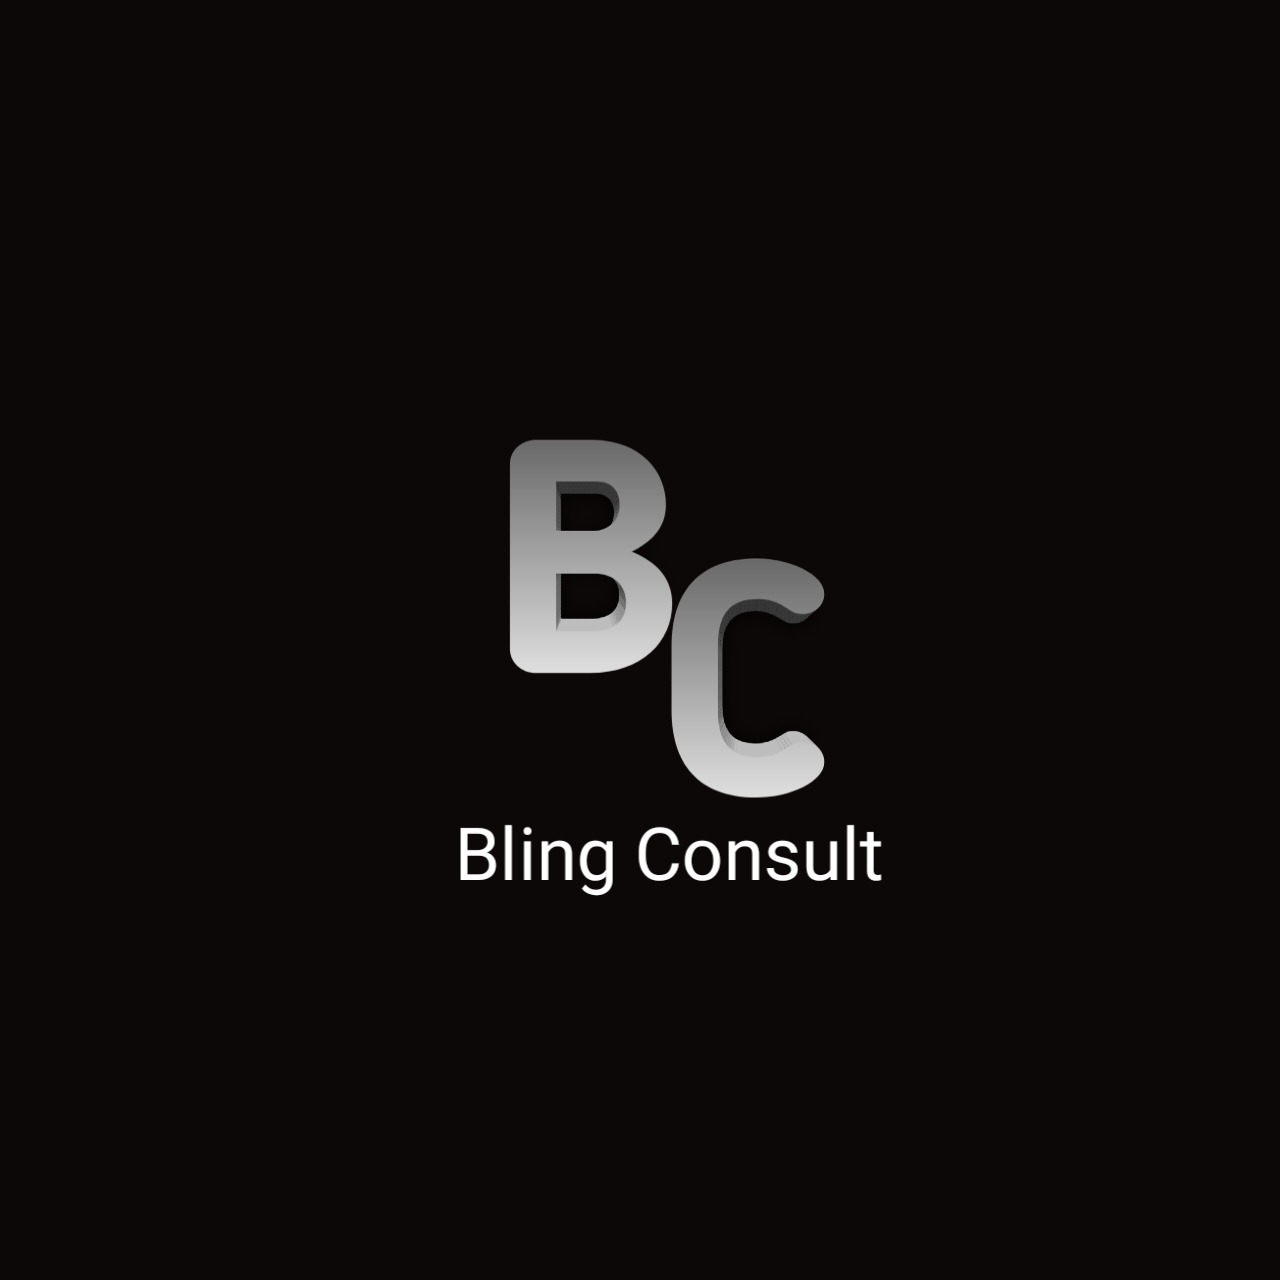 Bling consult